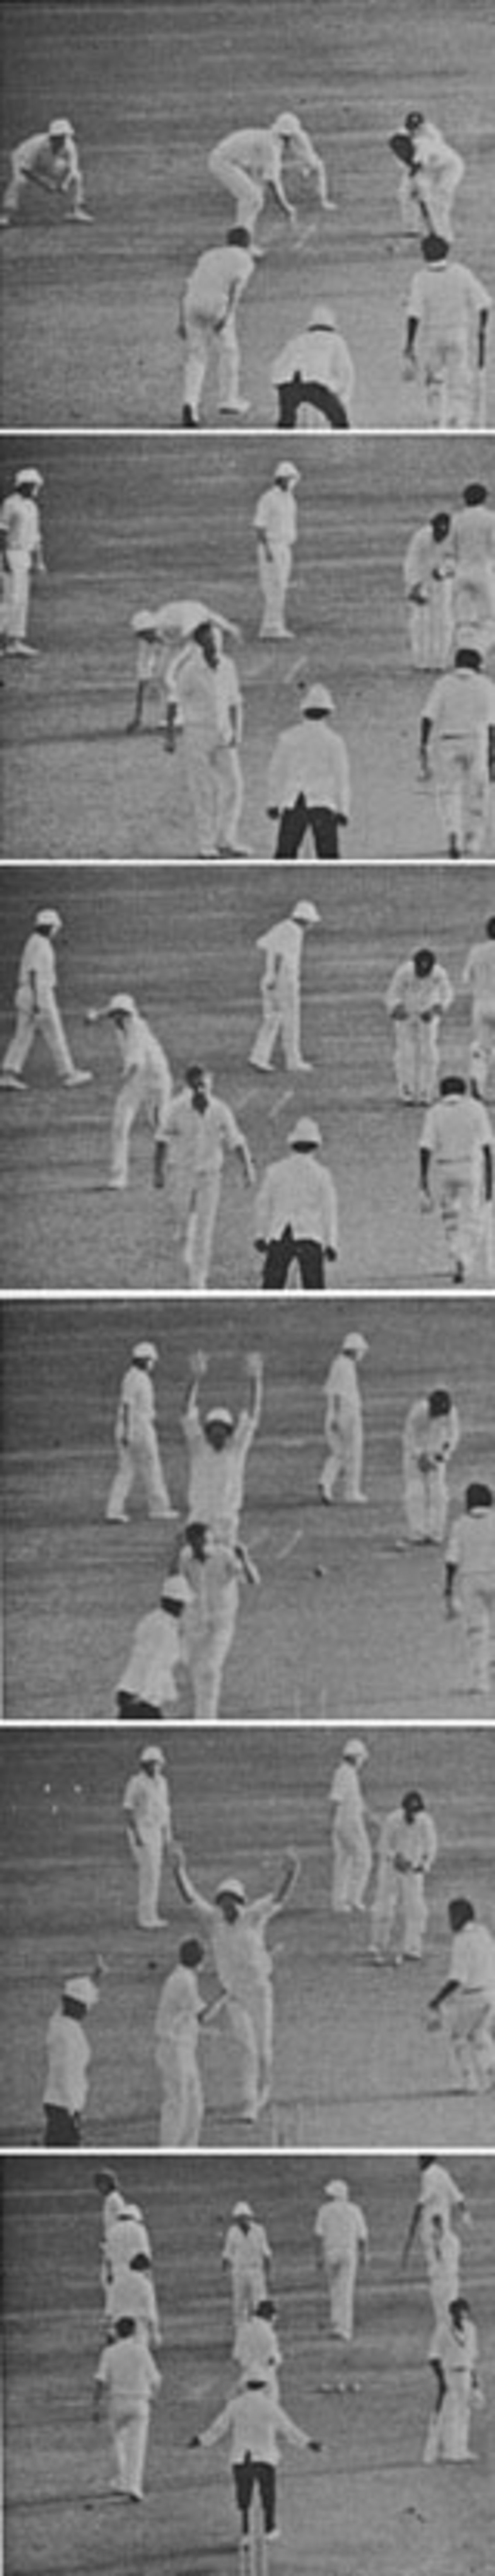 Close of play at Port-of-Spain. Derek Underwood bowls the last ball of the day to Bernard Julien who plays defensively to Tont Greig at silly point.  As the players turn to walk off, Greig picks up the ball and throws down the stumps at the non-striker's end where Alvin Kallicharran is rambling off. He hits ths stumps, appeals, and umpire Sang Hue gives Kallicharran run-out.  West Indies v England, 1st Test, Trinidad, February 3, 1974